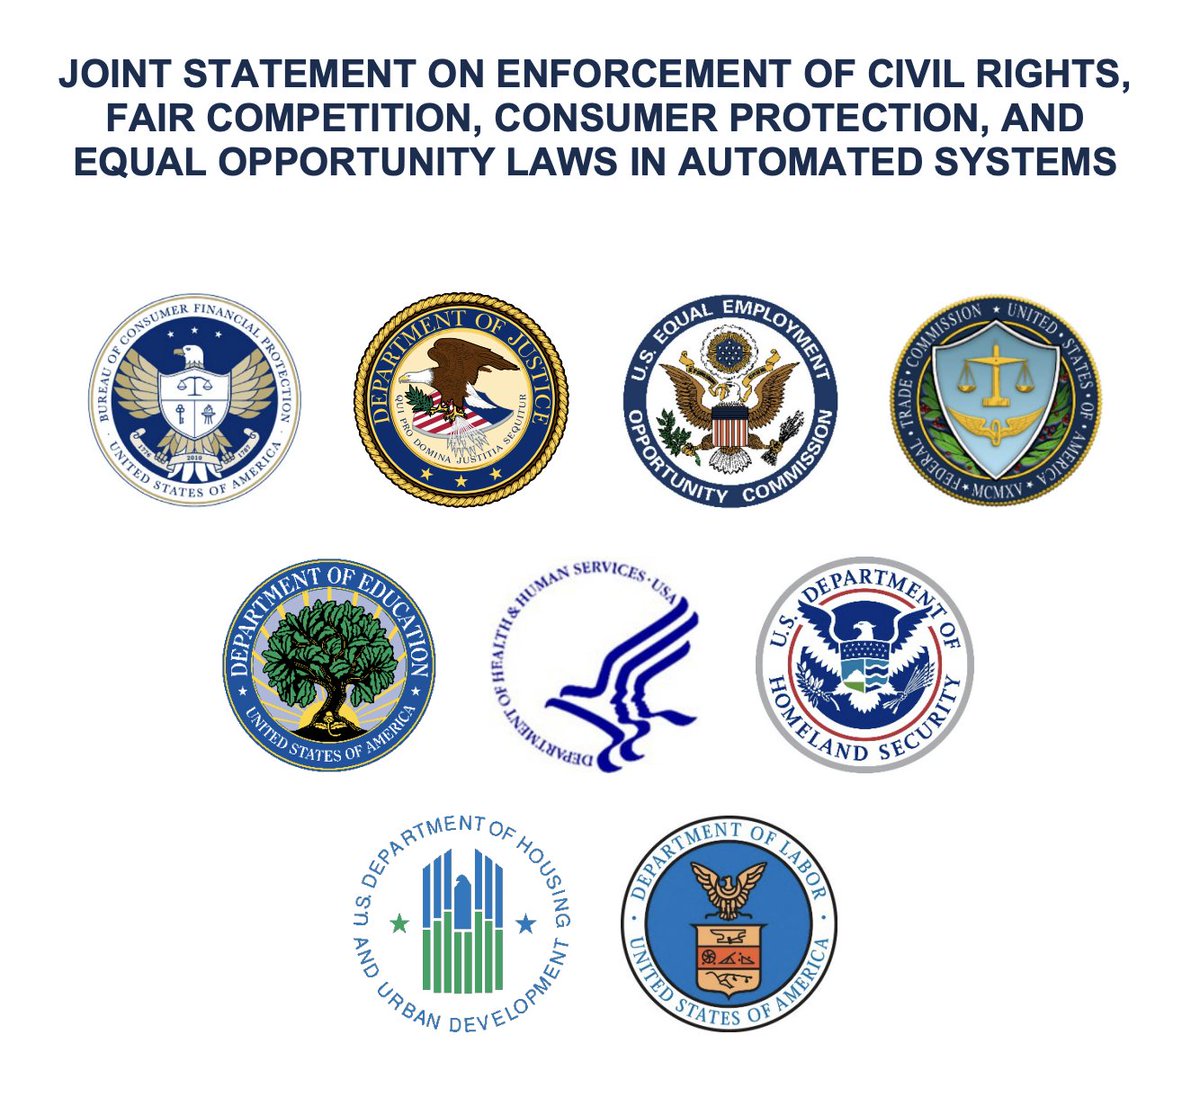 🚨BREAKING: US Federal agencies commit to tackling discrimination and protecting civil rights, fair competition, consumer protection, and equal opportunity in the context of AI and automated systems. Quotes: 'The Consumer Financial Protection Bureau (CFPB) supervises, sets rules…